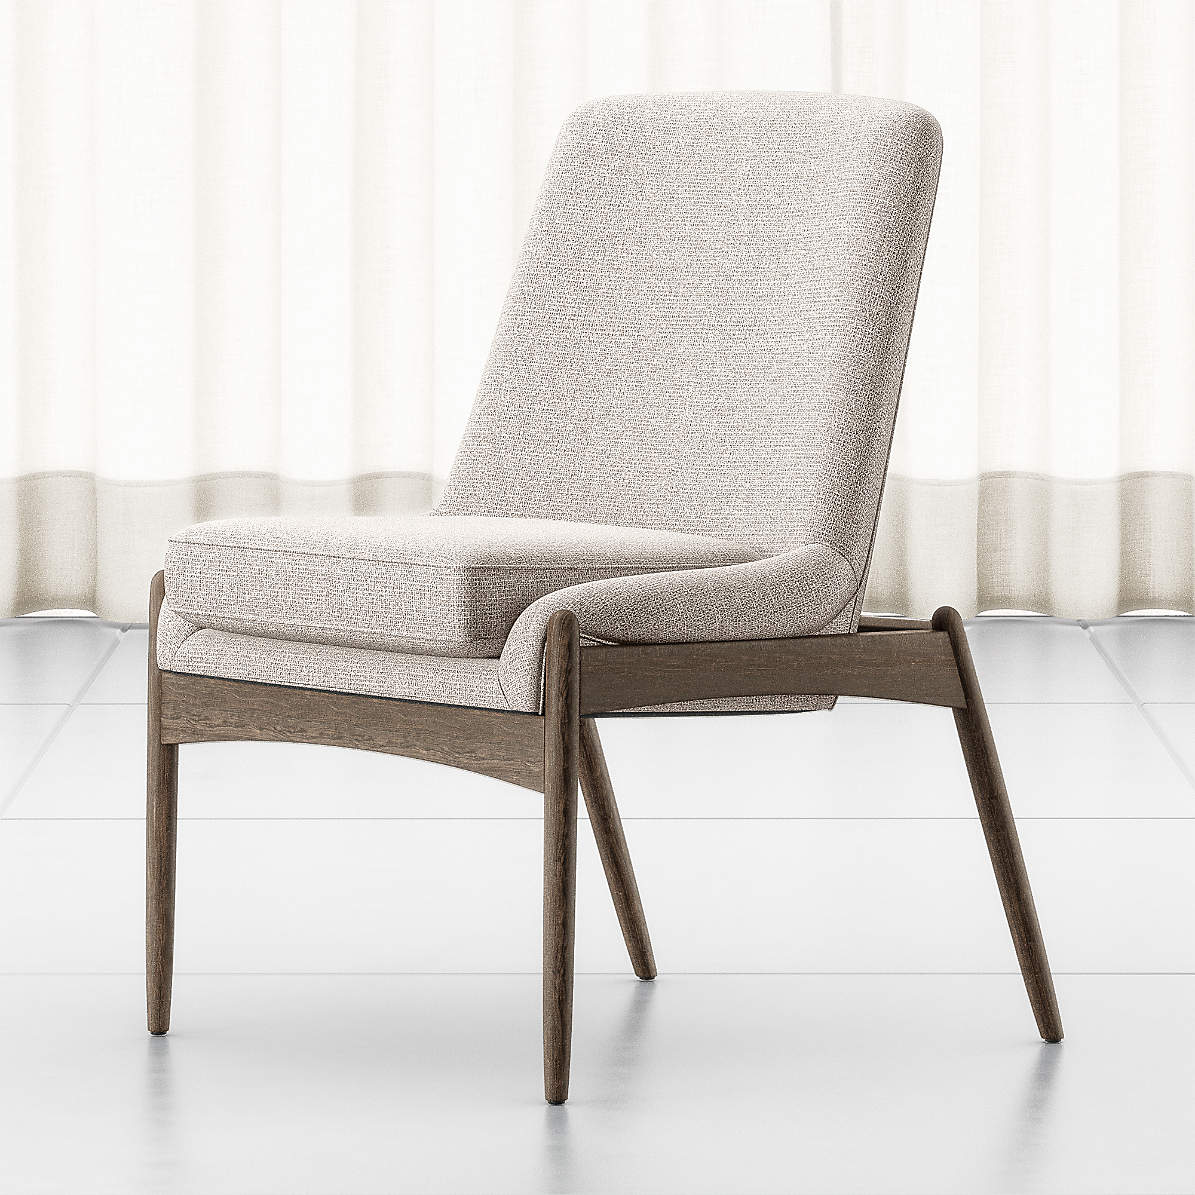 ashton midcentury dining chair  reviews  crate and barrel